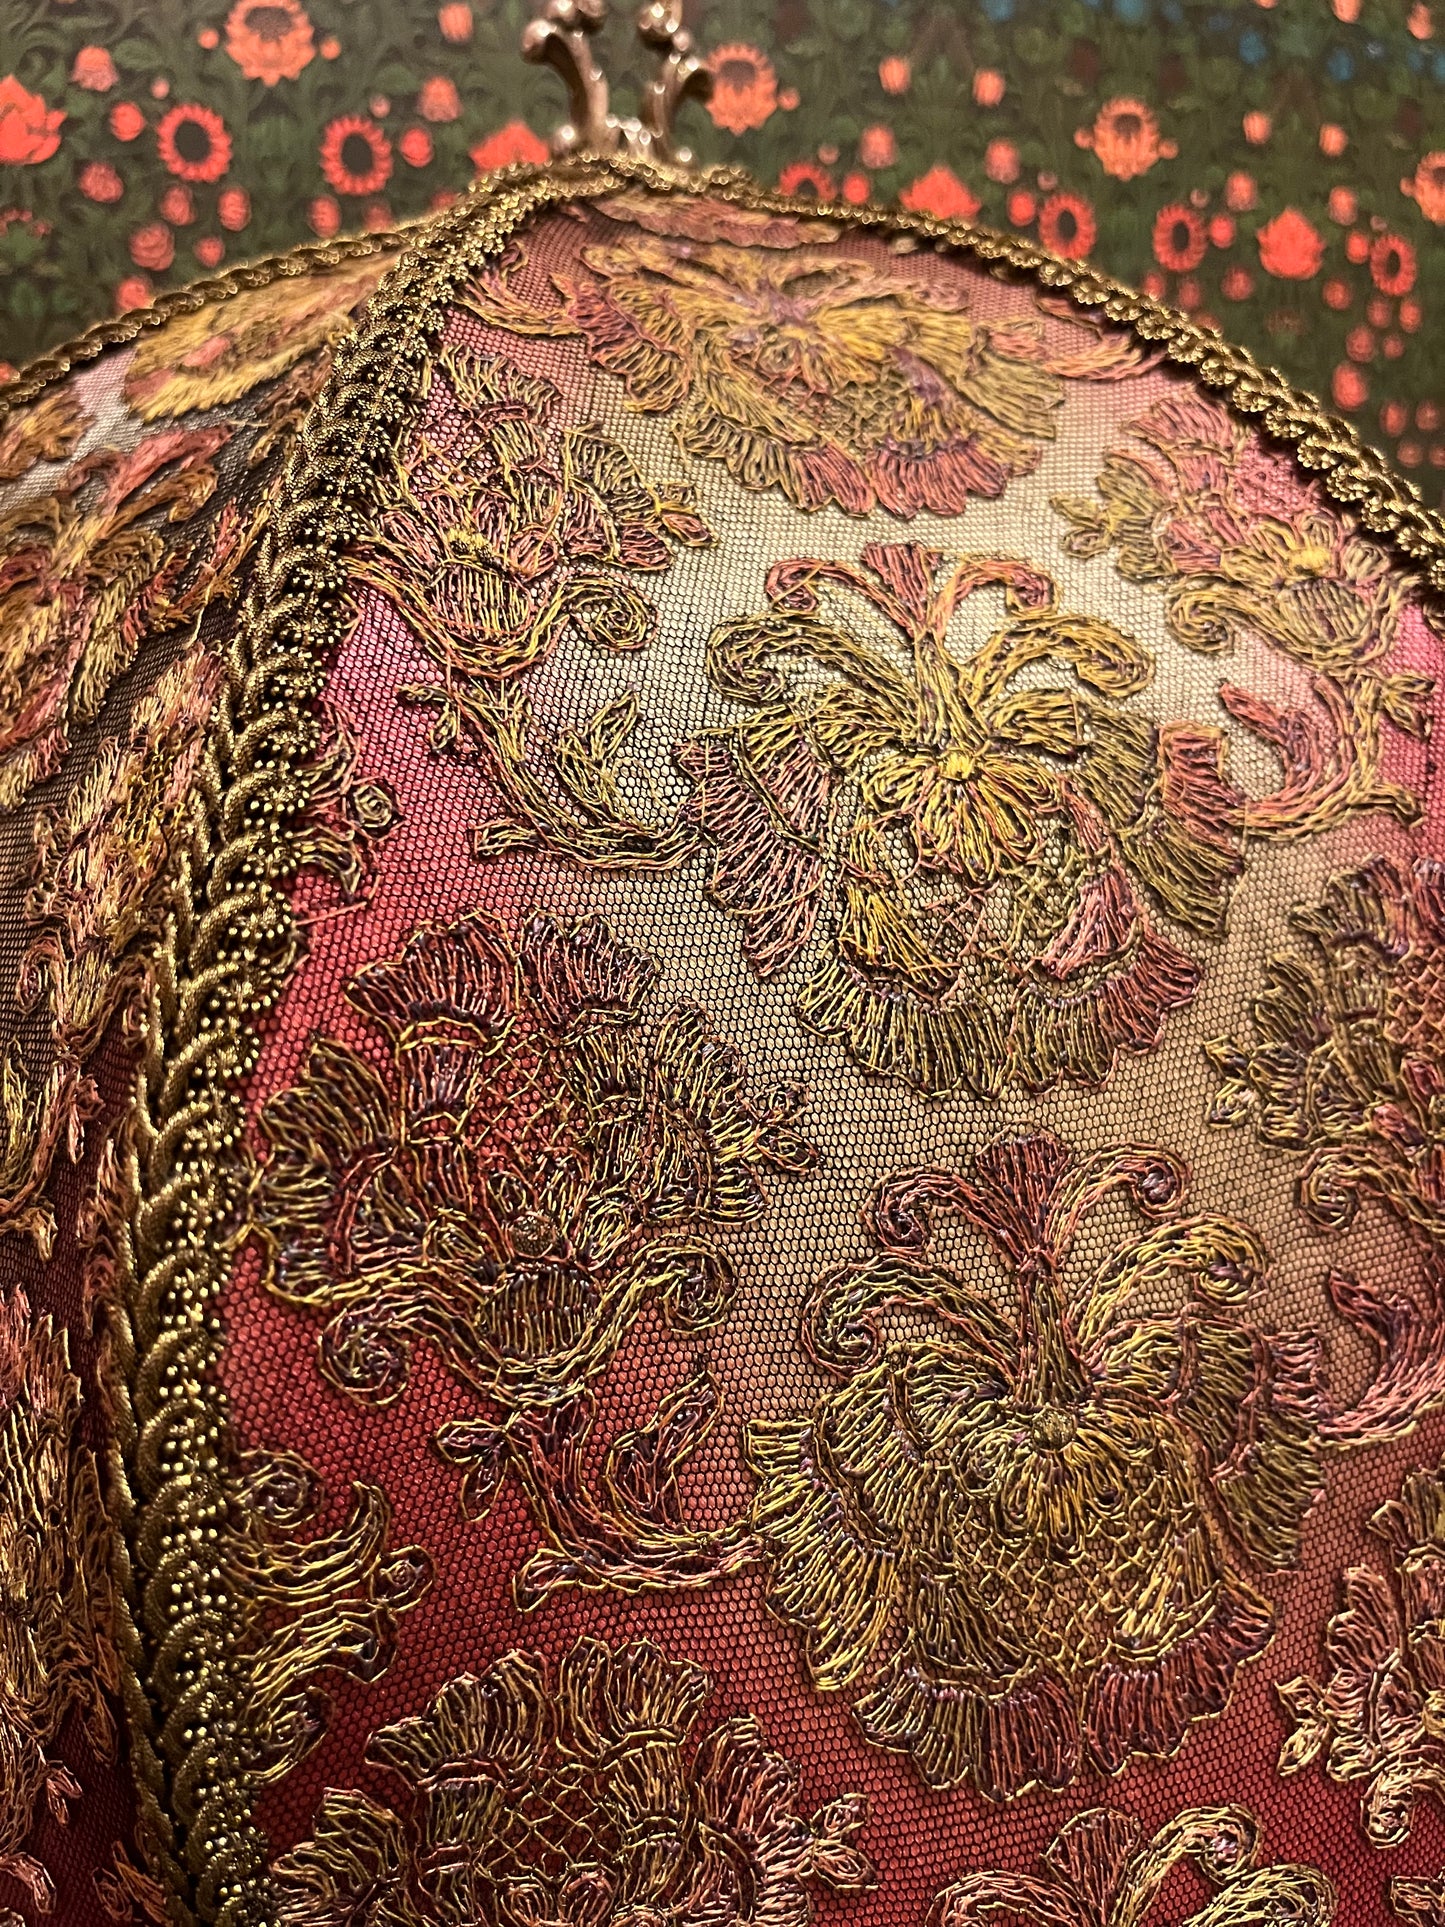 Gold & Pink Antique Embroidery Mushroom Lampshade